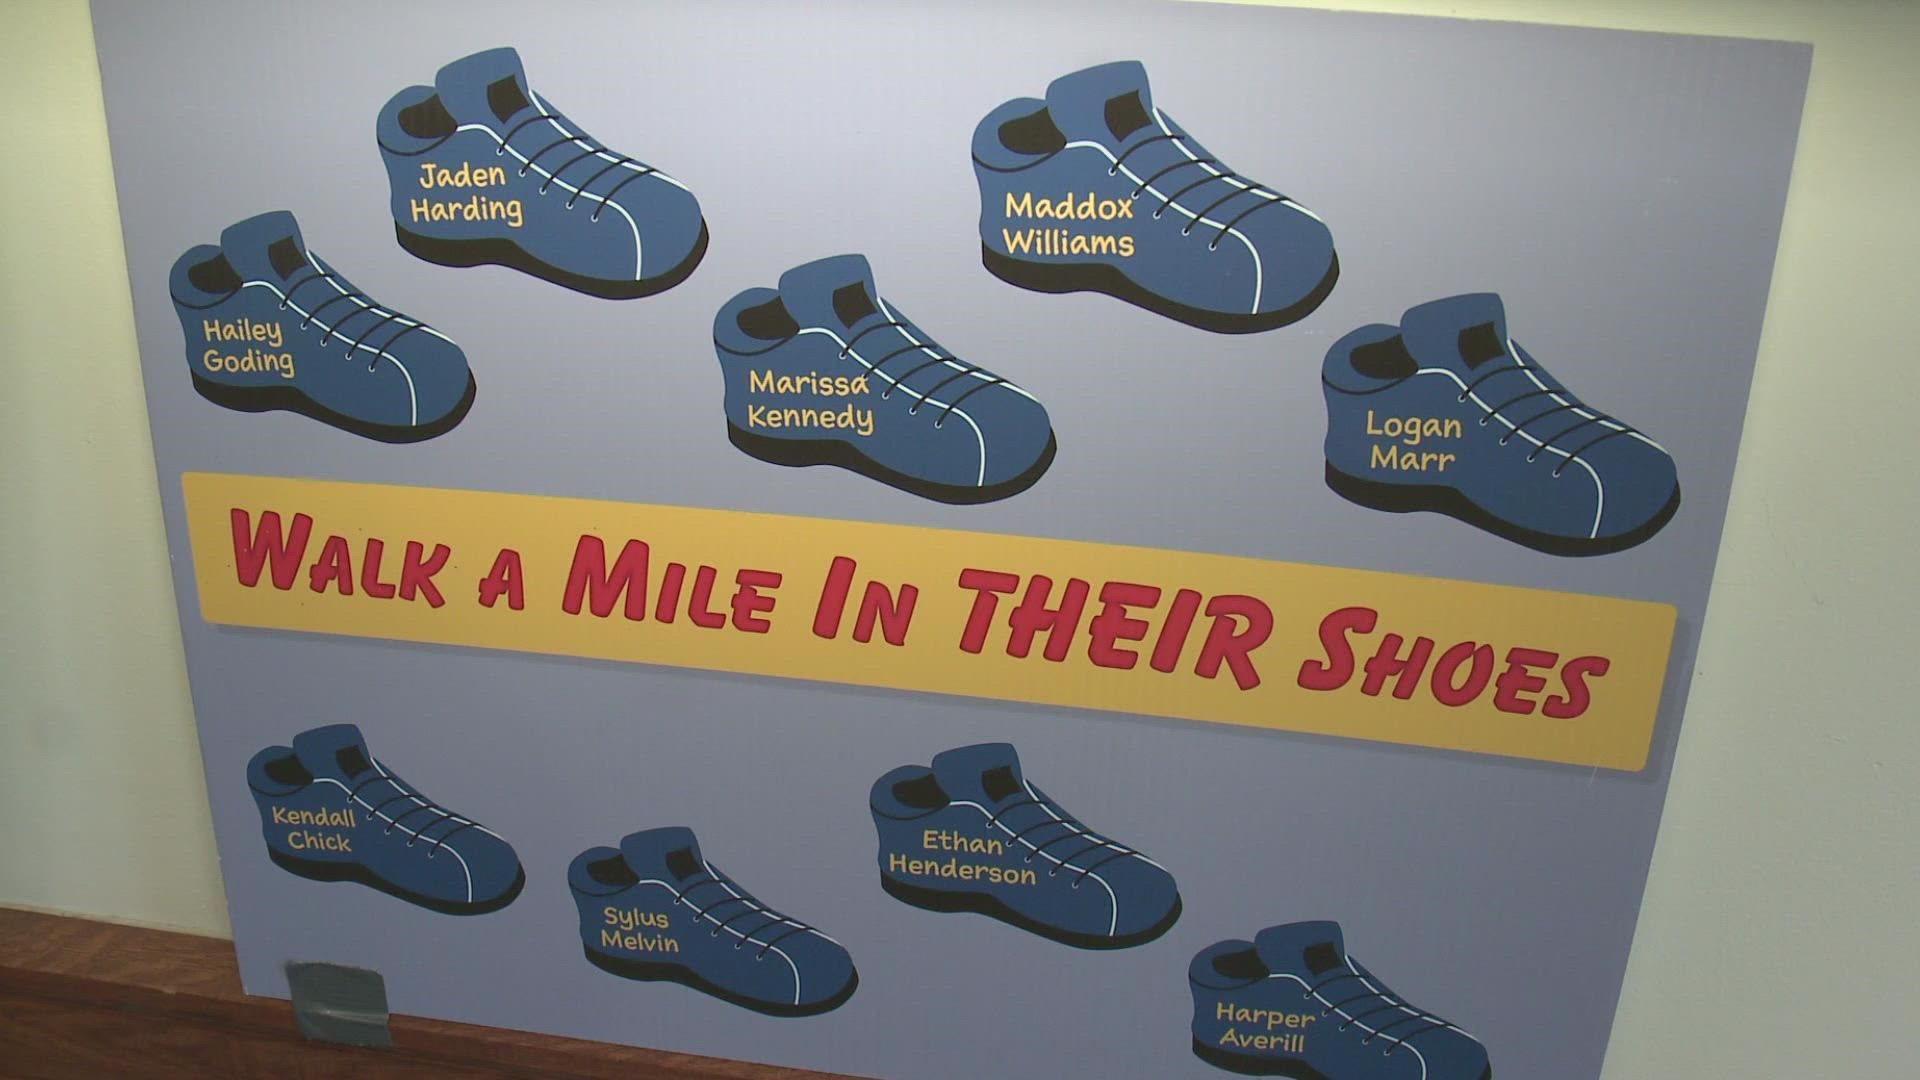 Walk a Mile in Their Shoes is a nonprofit created by former state senator Bill Diamond to prevent the abuse of children in state custody.